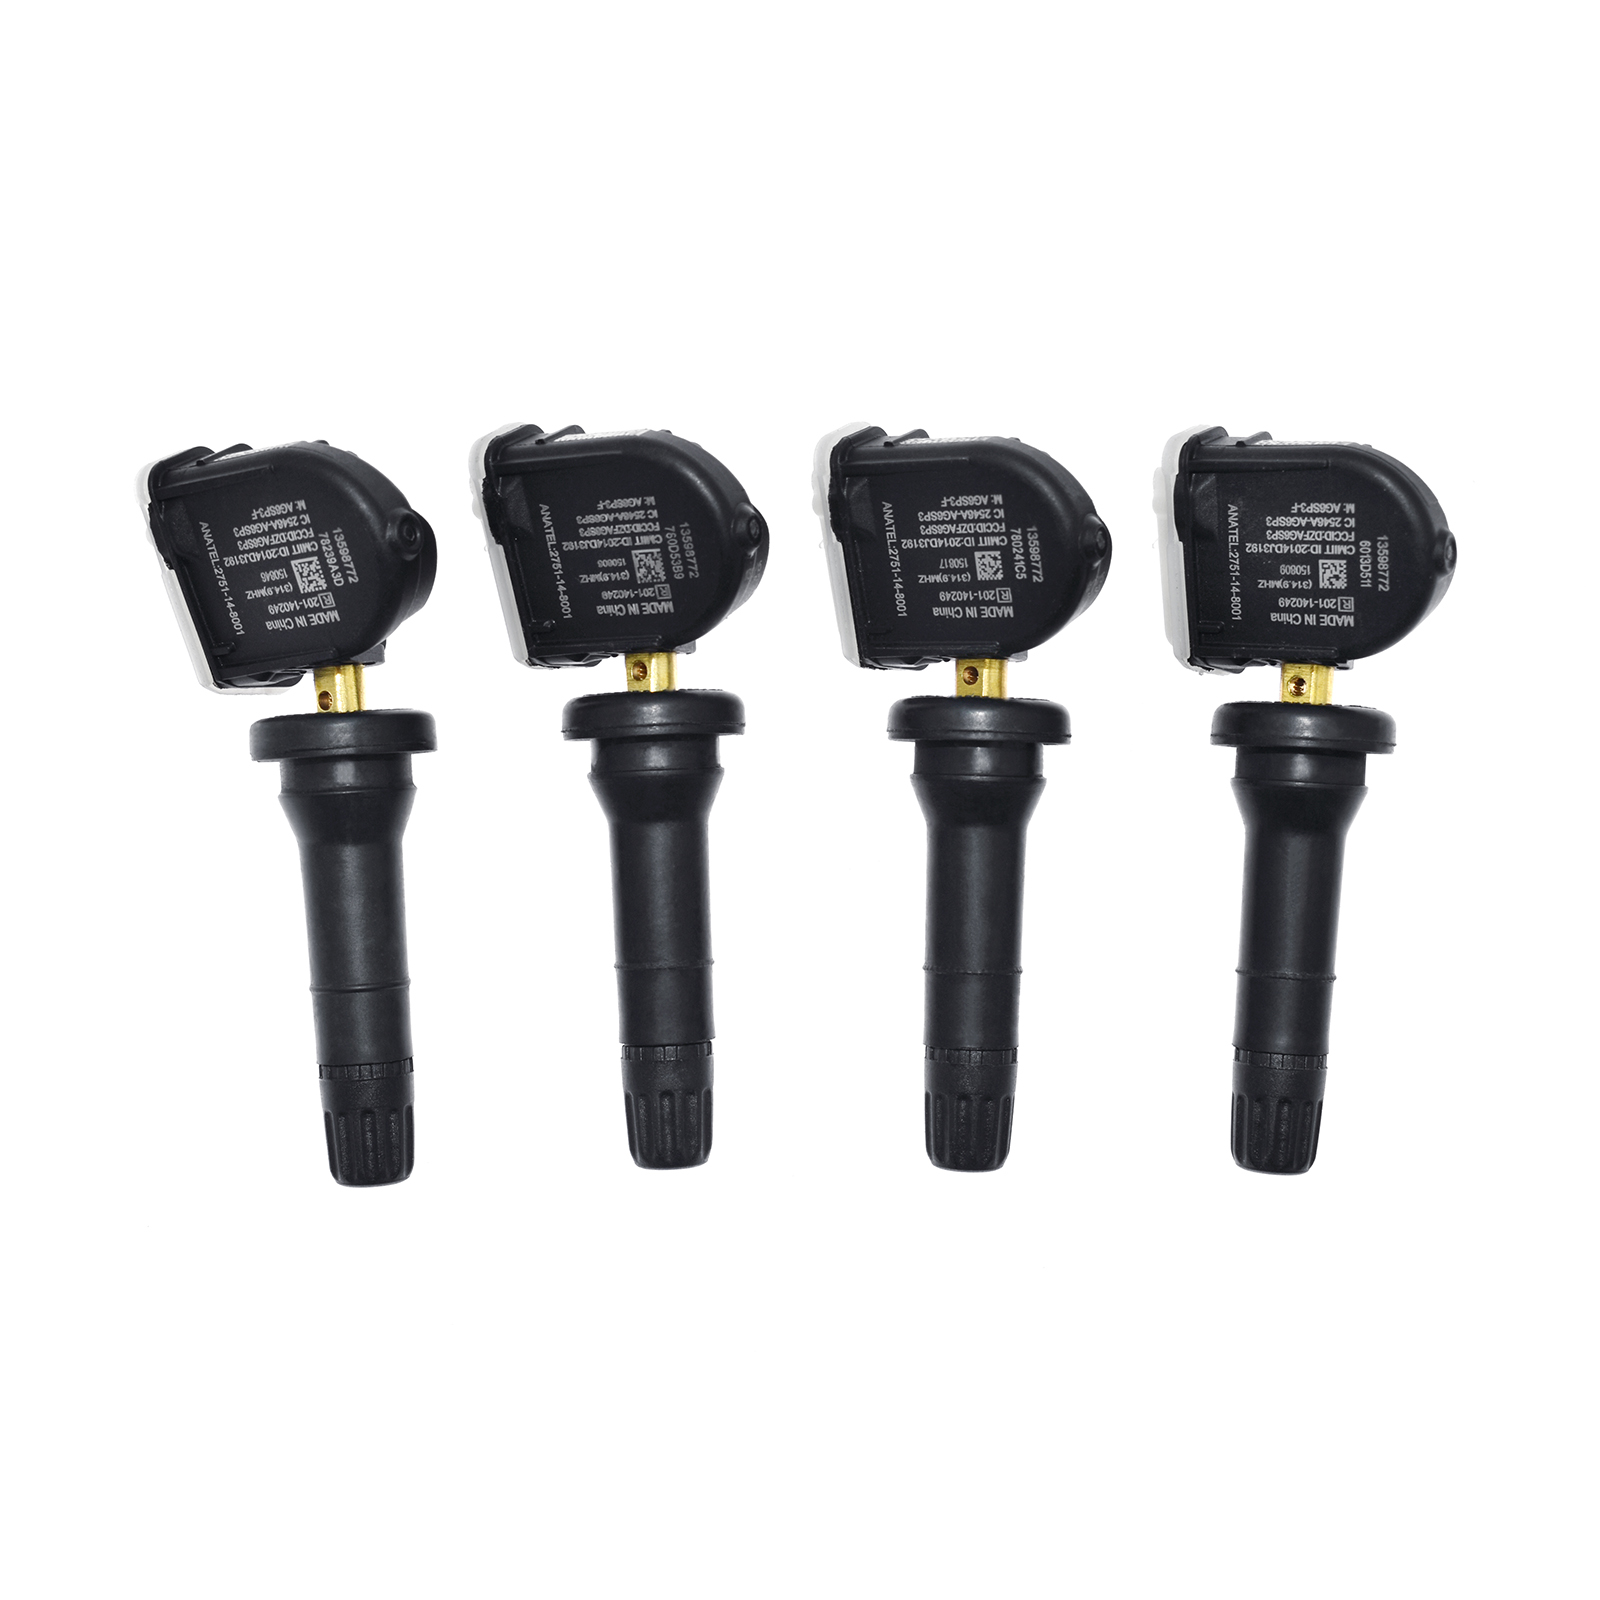 4Pcs TPMS Tire Pressure Monitoring System for Buick Cadilliac Chevrolet